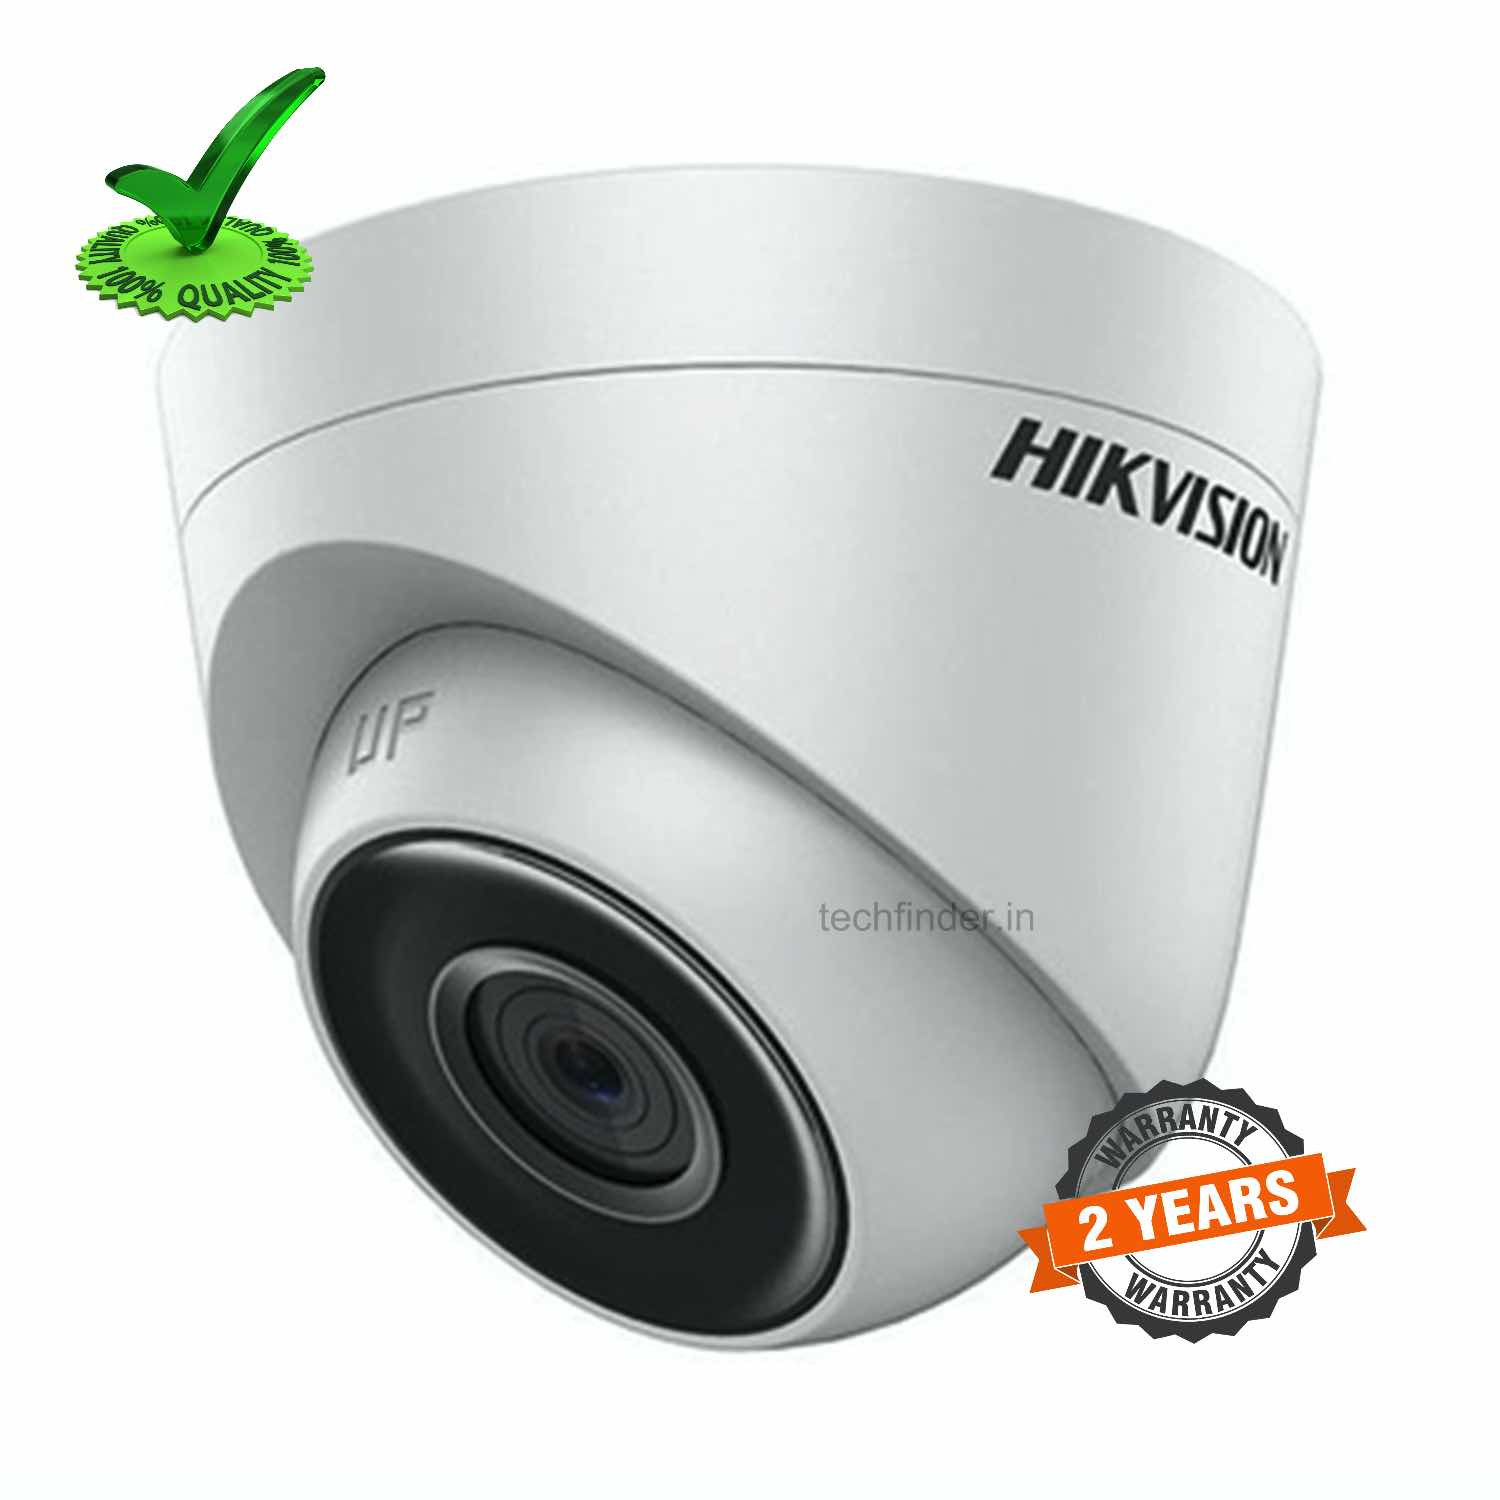 Hikvision DS 2CE56H0T ITPF 5 Mp HD Dome Camera